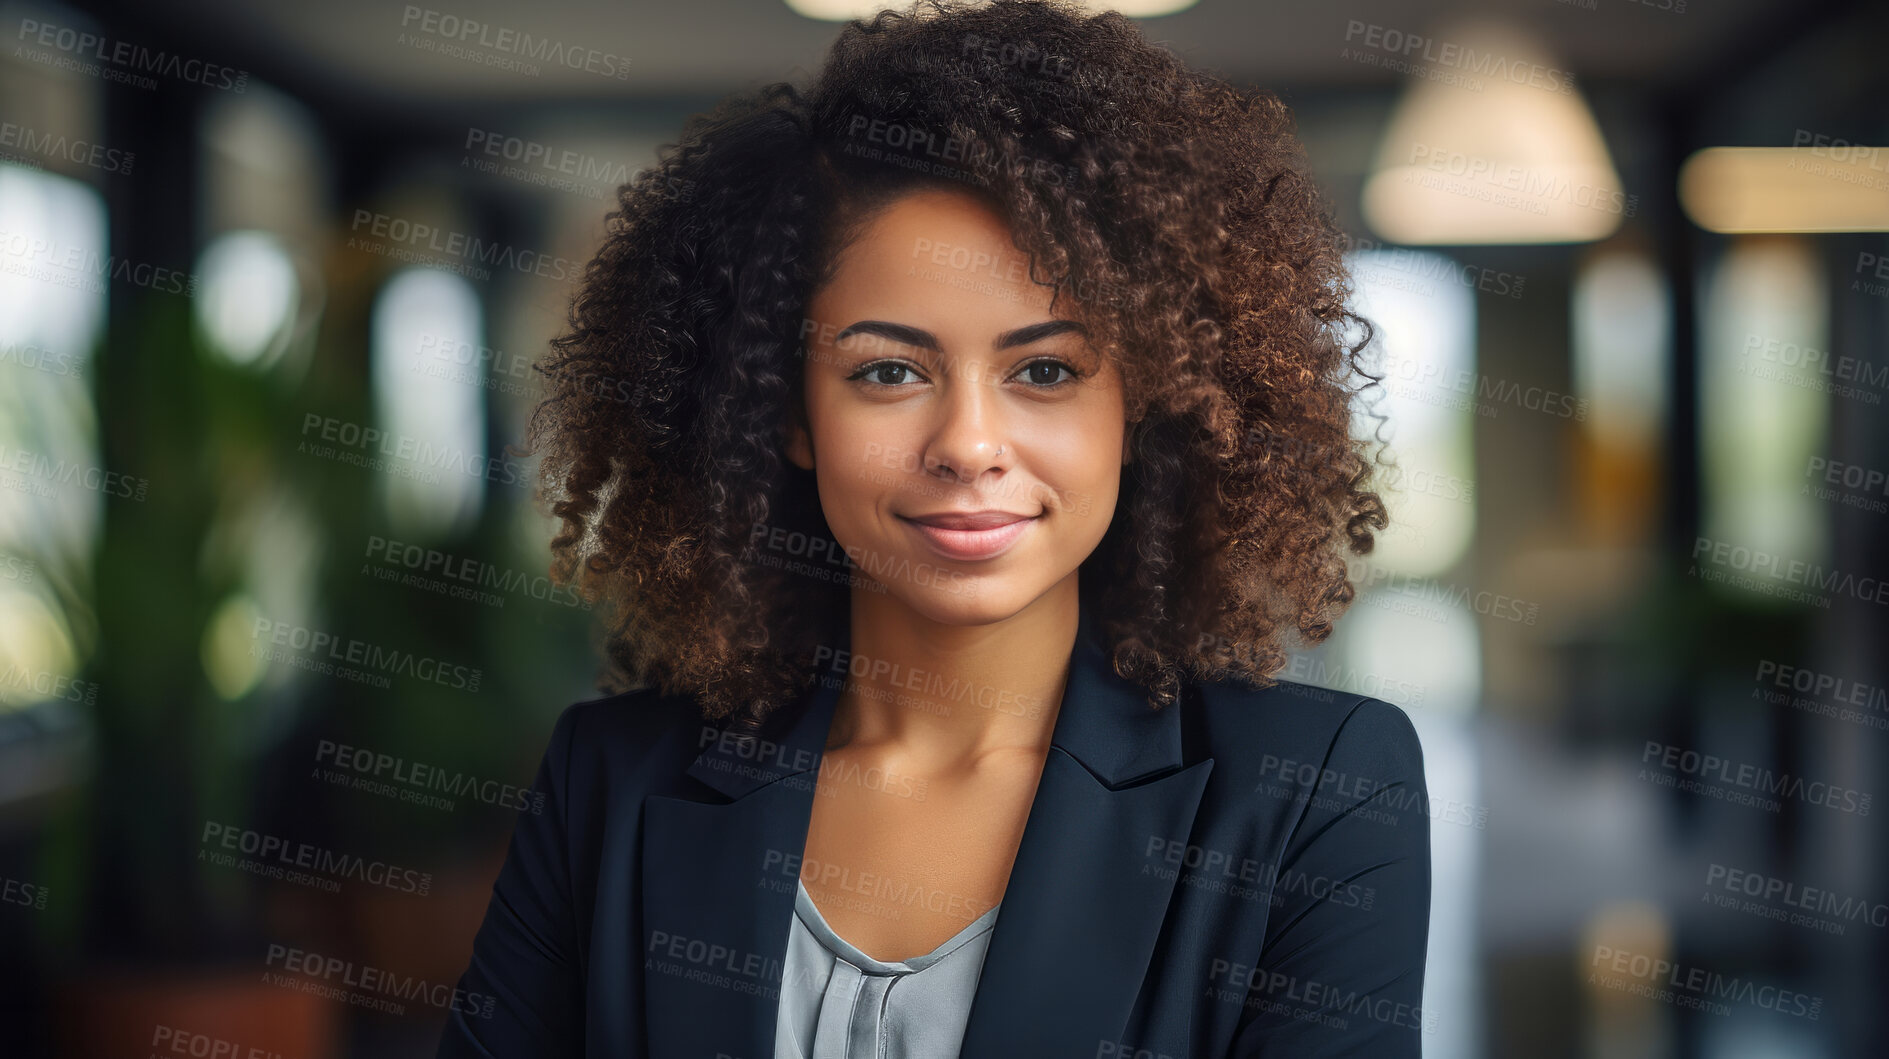 Buy stock photo Modern business woman posing in office. Business concept.